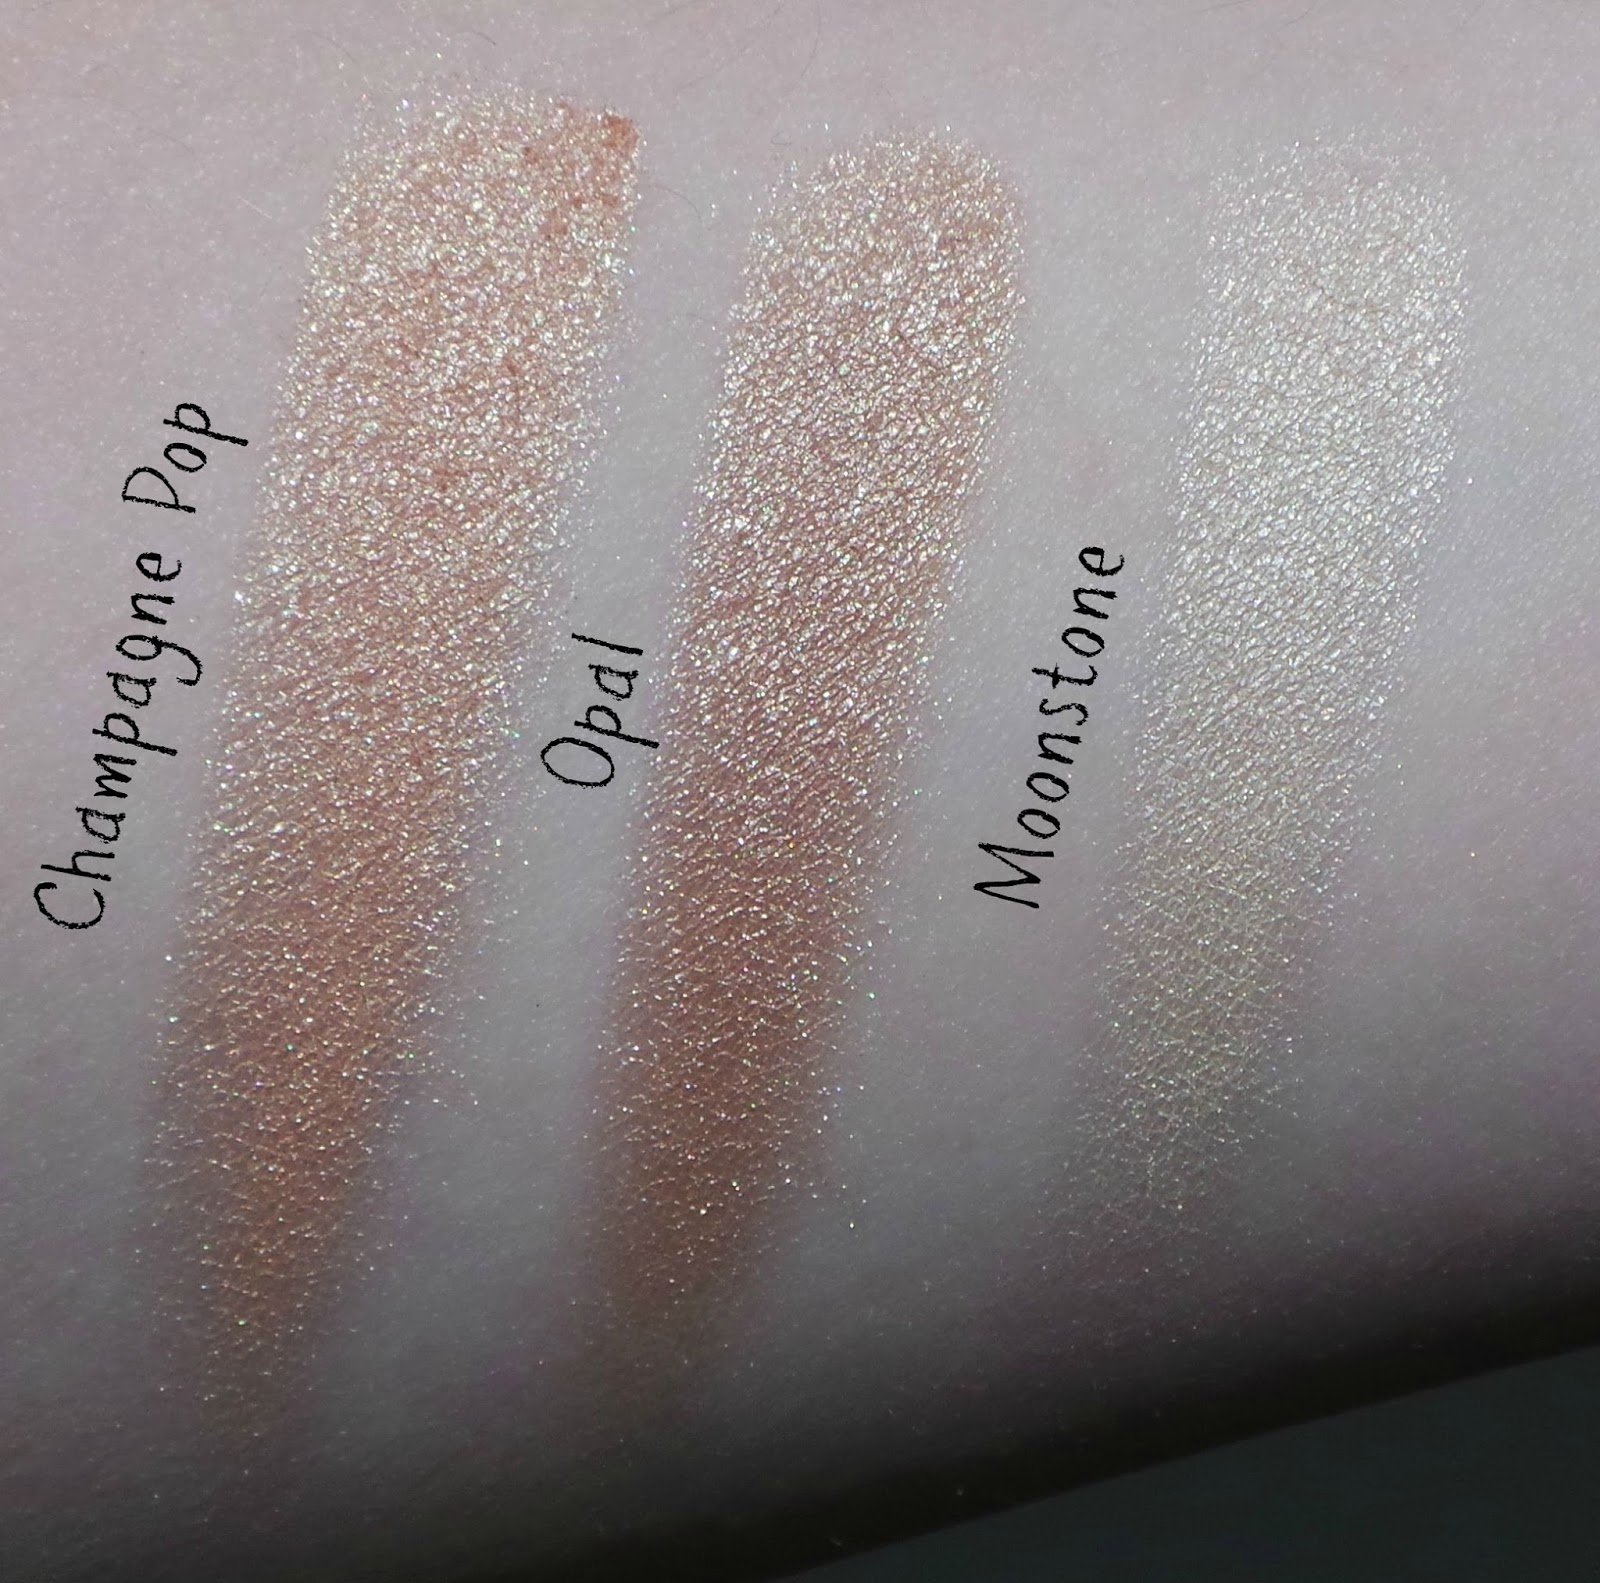 Becca x Jaclyn Hill Shimmering Skin Perfector Champagne Pop